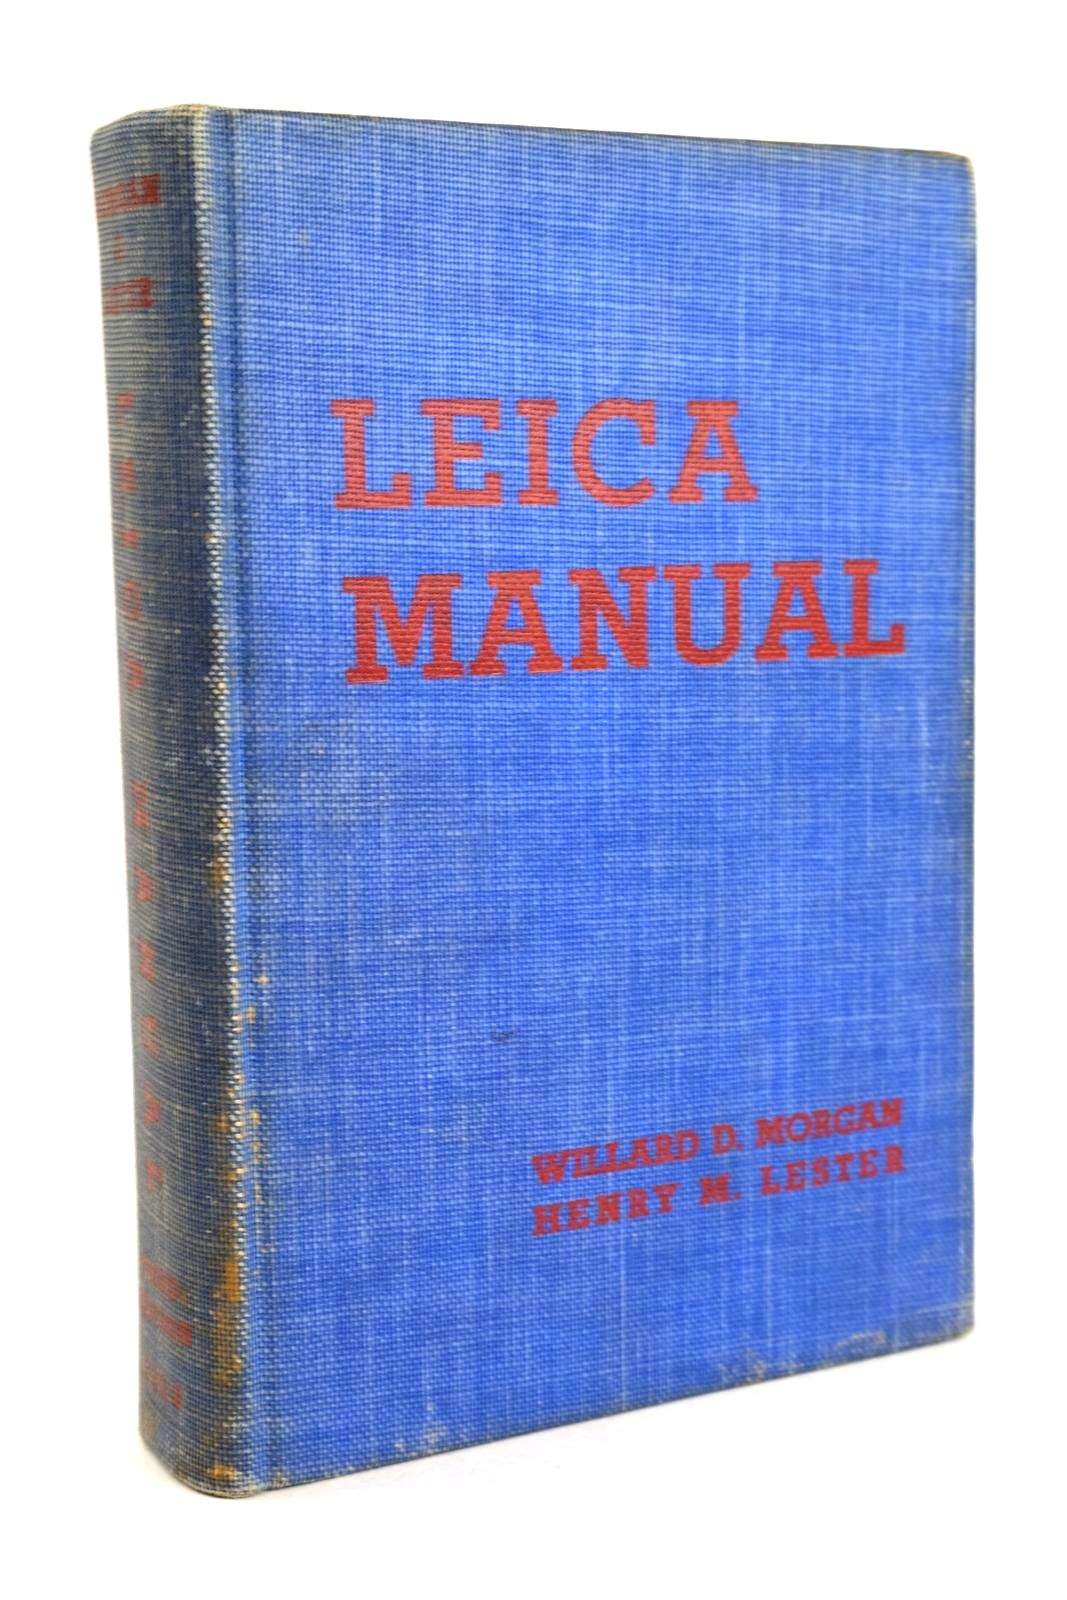 Photo of LEICA MANUAL (THIRD EDITION) written by Morgan, Willard D. Lester, Henry M. et al, published by Morgan &amp; Lester Publishers (STOCK CODE: 1327703)  for sale by Stella & Rose's Books